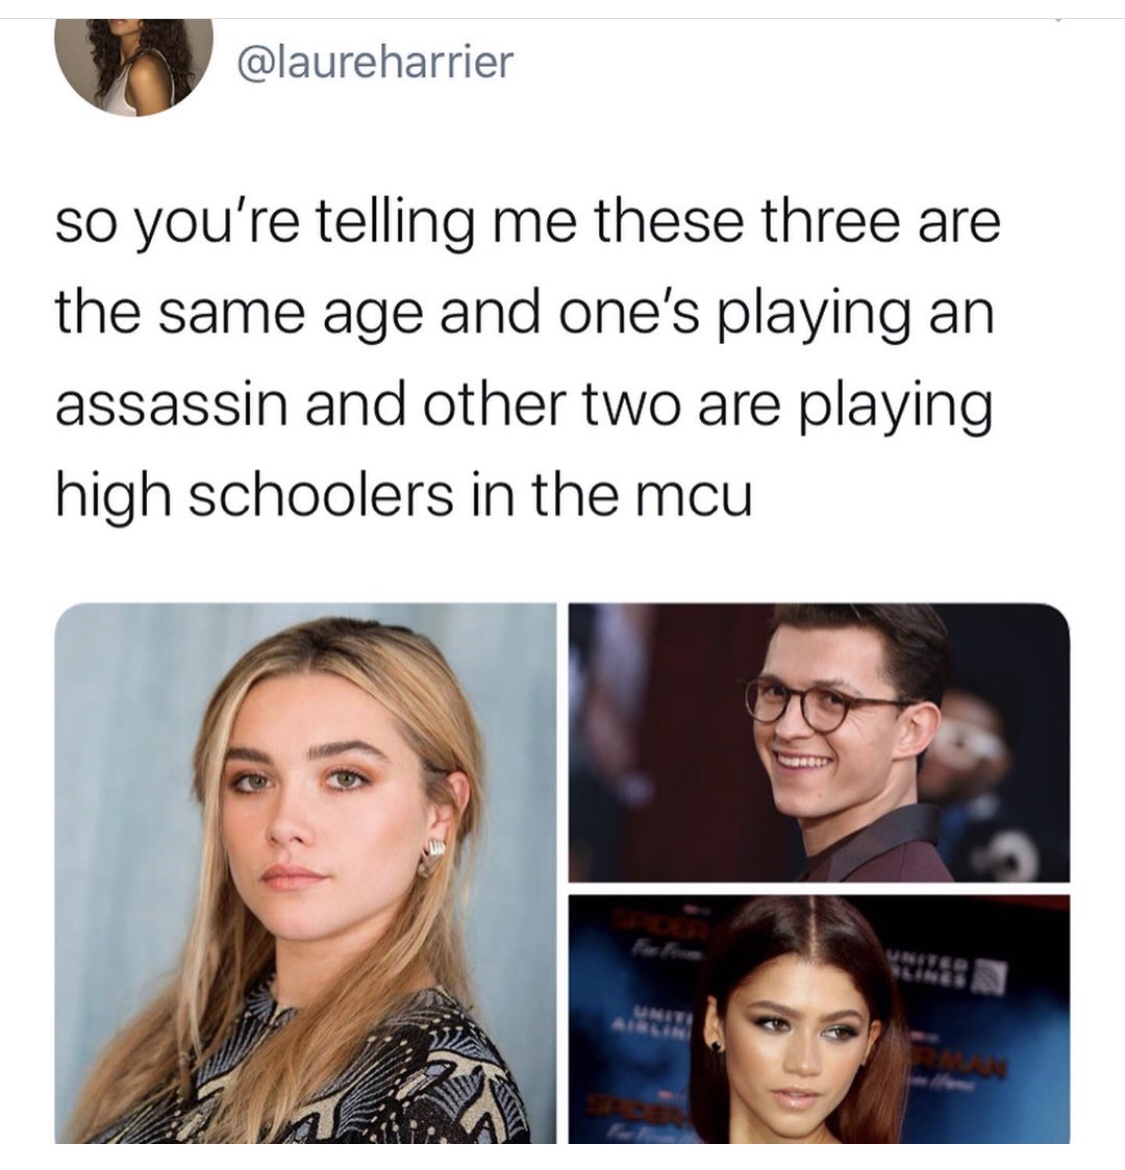 human behavior - so you're telling me these three are the same age and one's playing an assassin and other two are playing high schoolers in the mcu